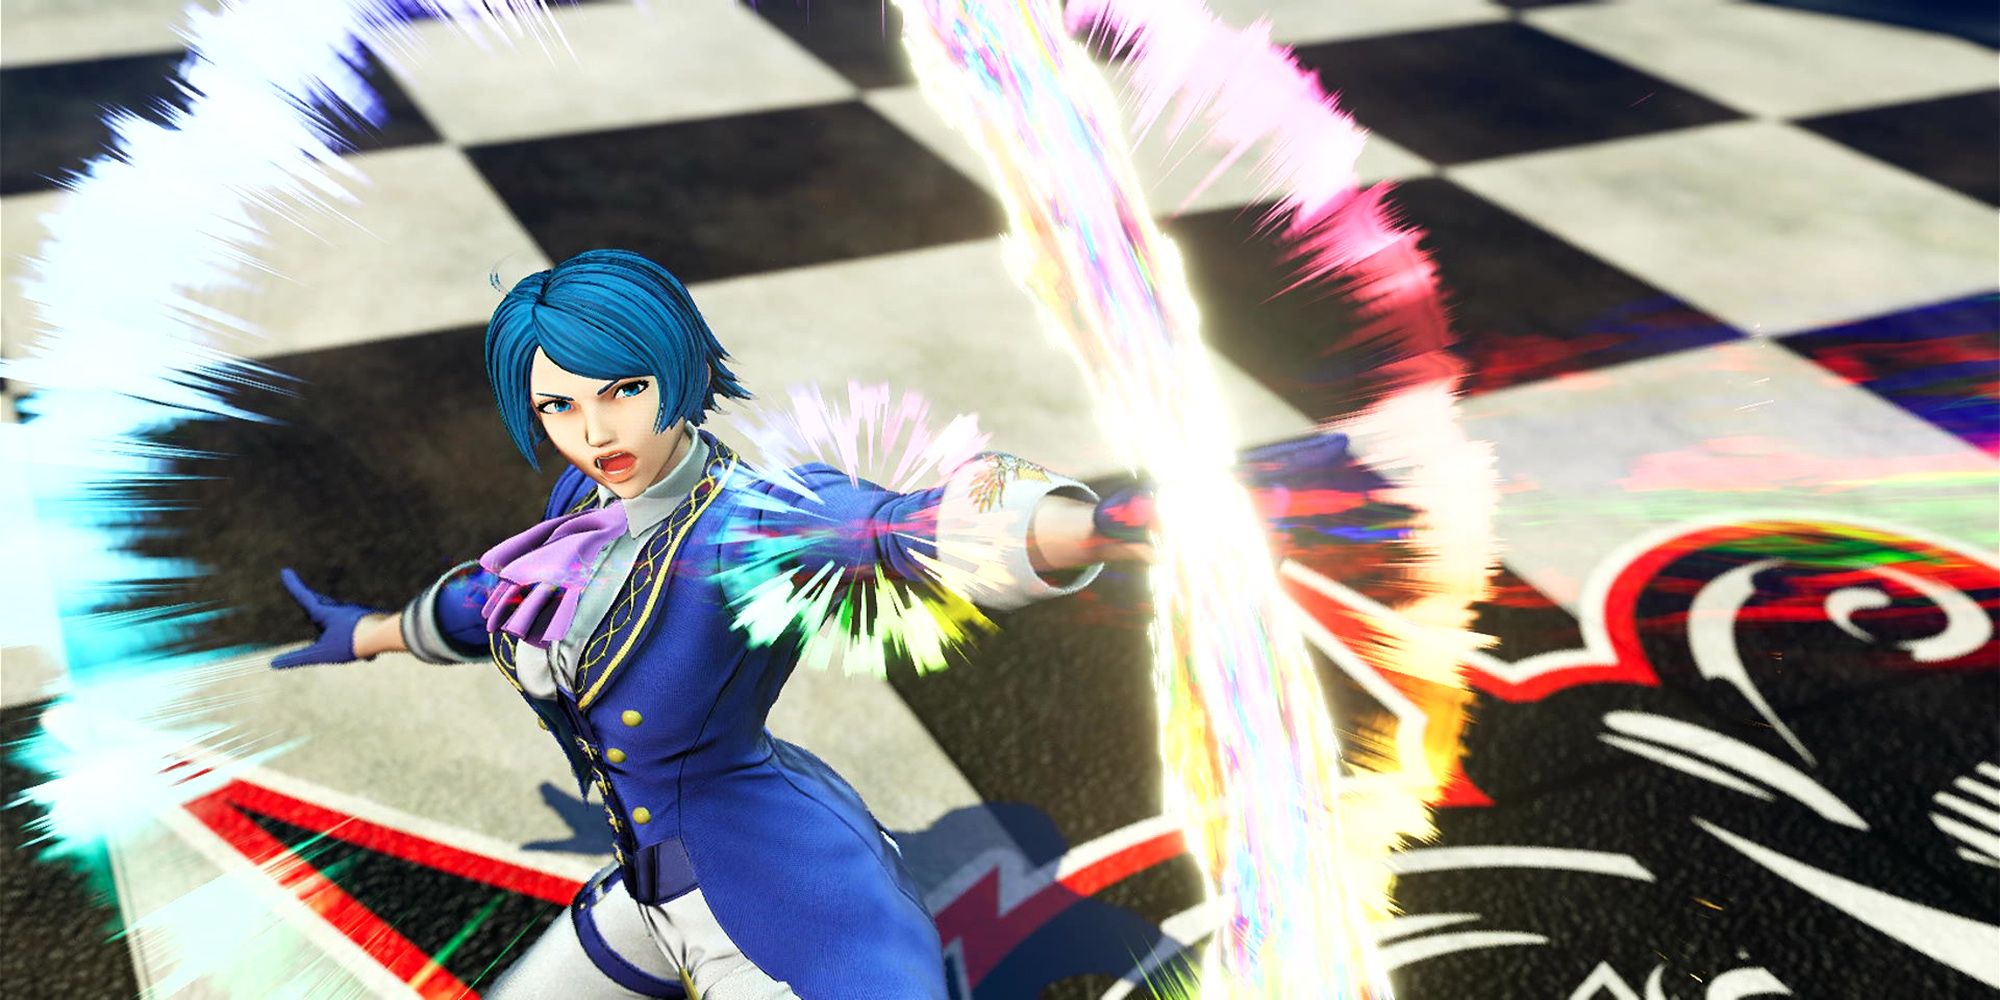 Elisabeth launches an arrow toward her opponent during her Climax Super Special move, Fête de la Lumière, in a battle at the Concert Hall. The King Of Fighters 15.